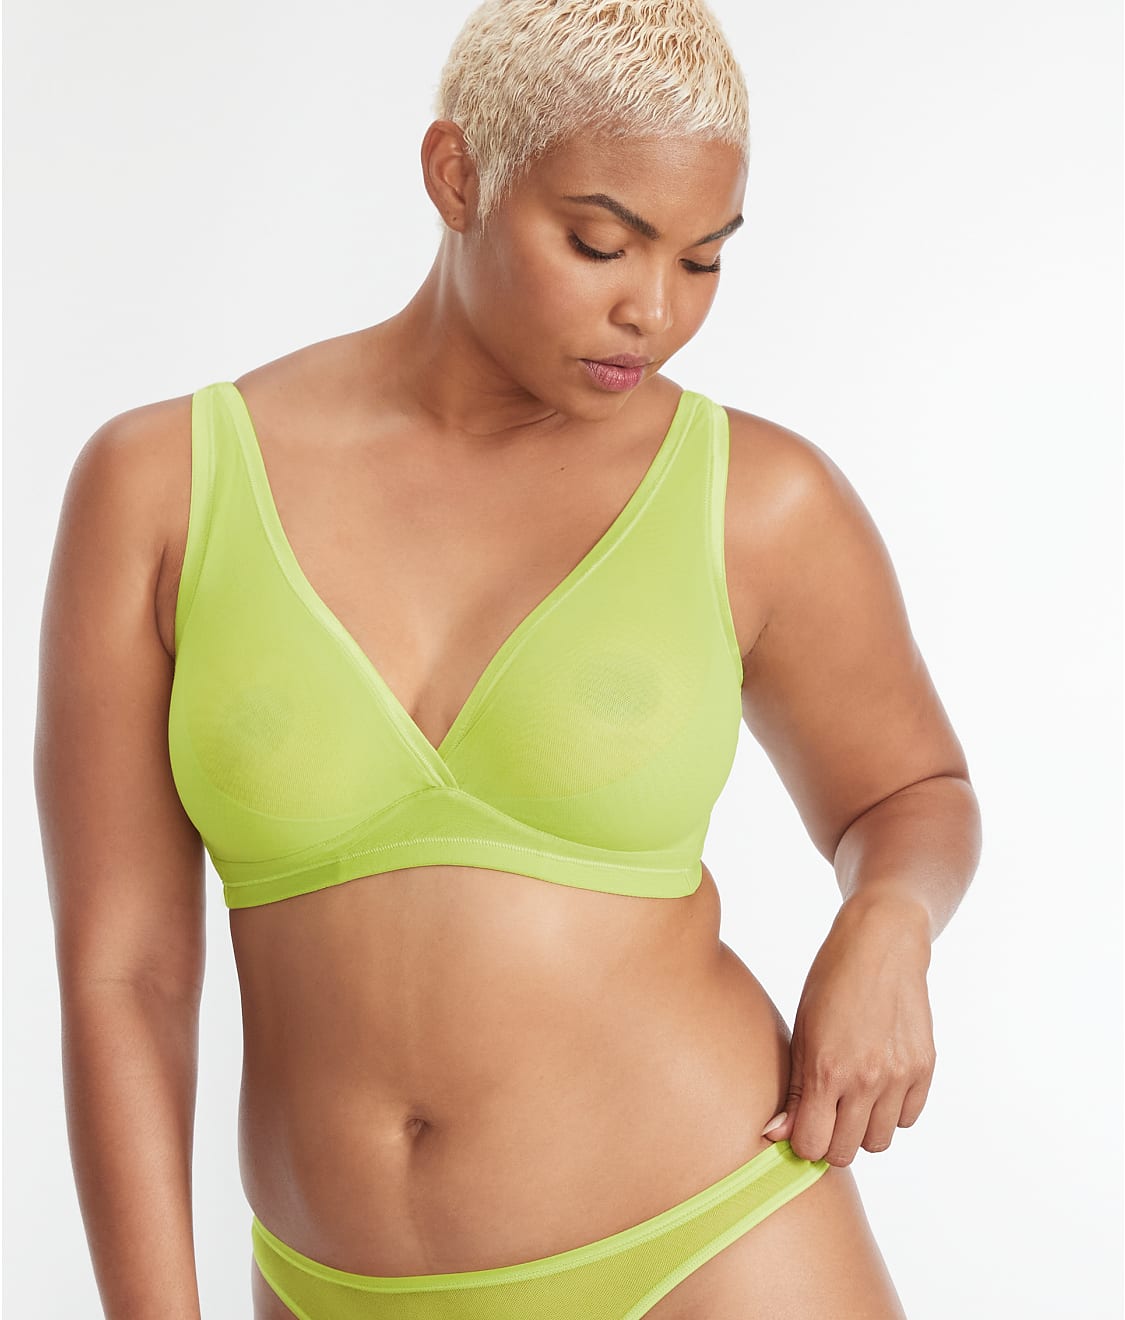 Cosabella Soire Curvy Sheer Mesh Bralette & Reviews | Bare Necessities  (Style SOIRC1310)